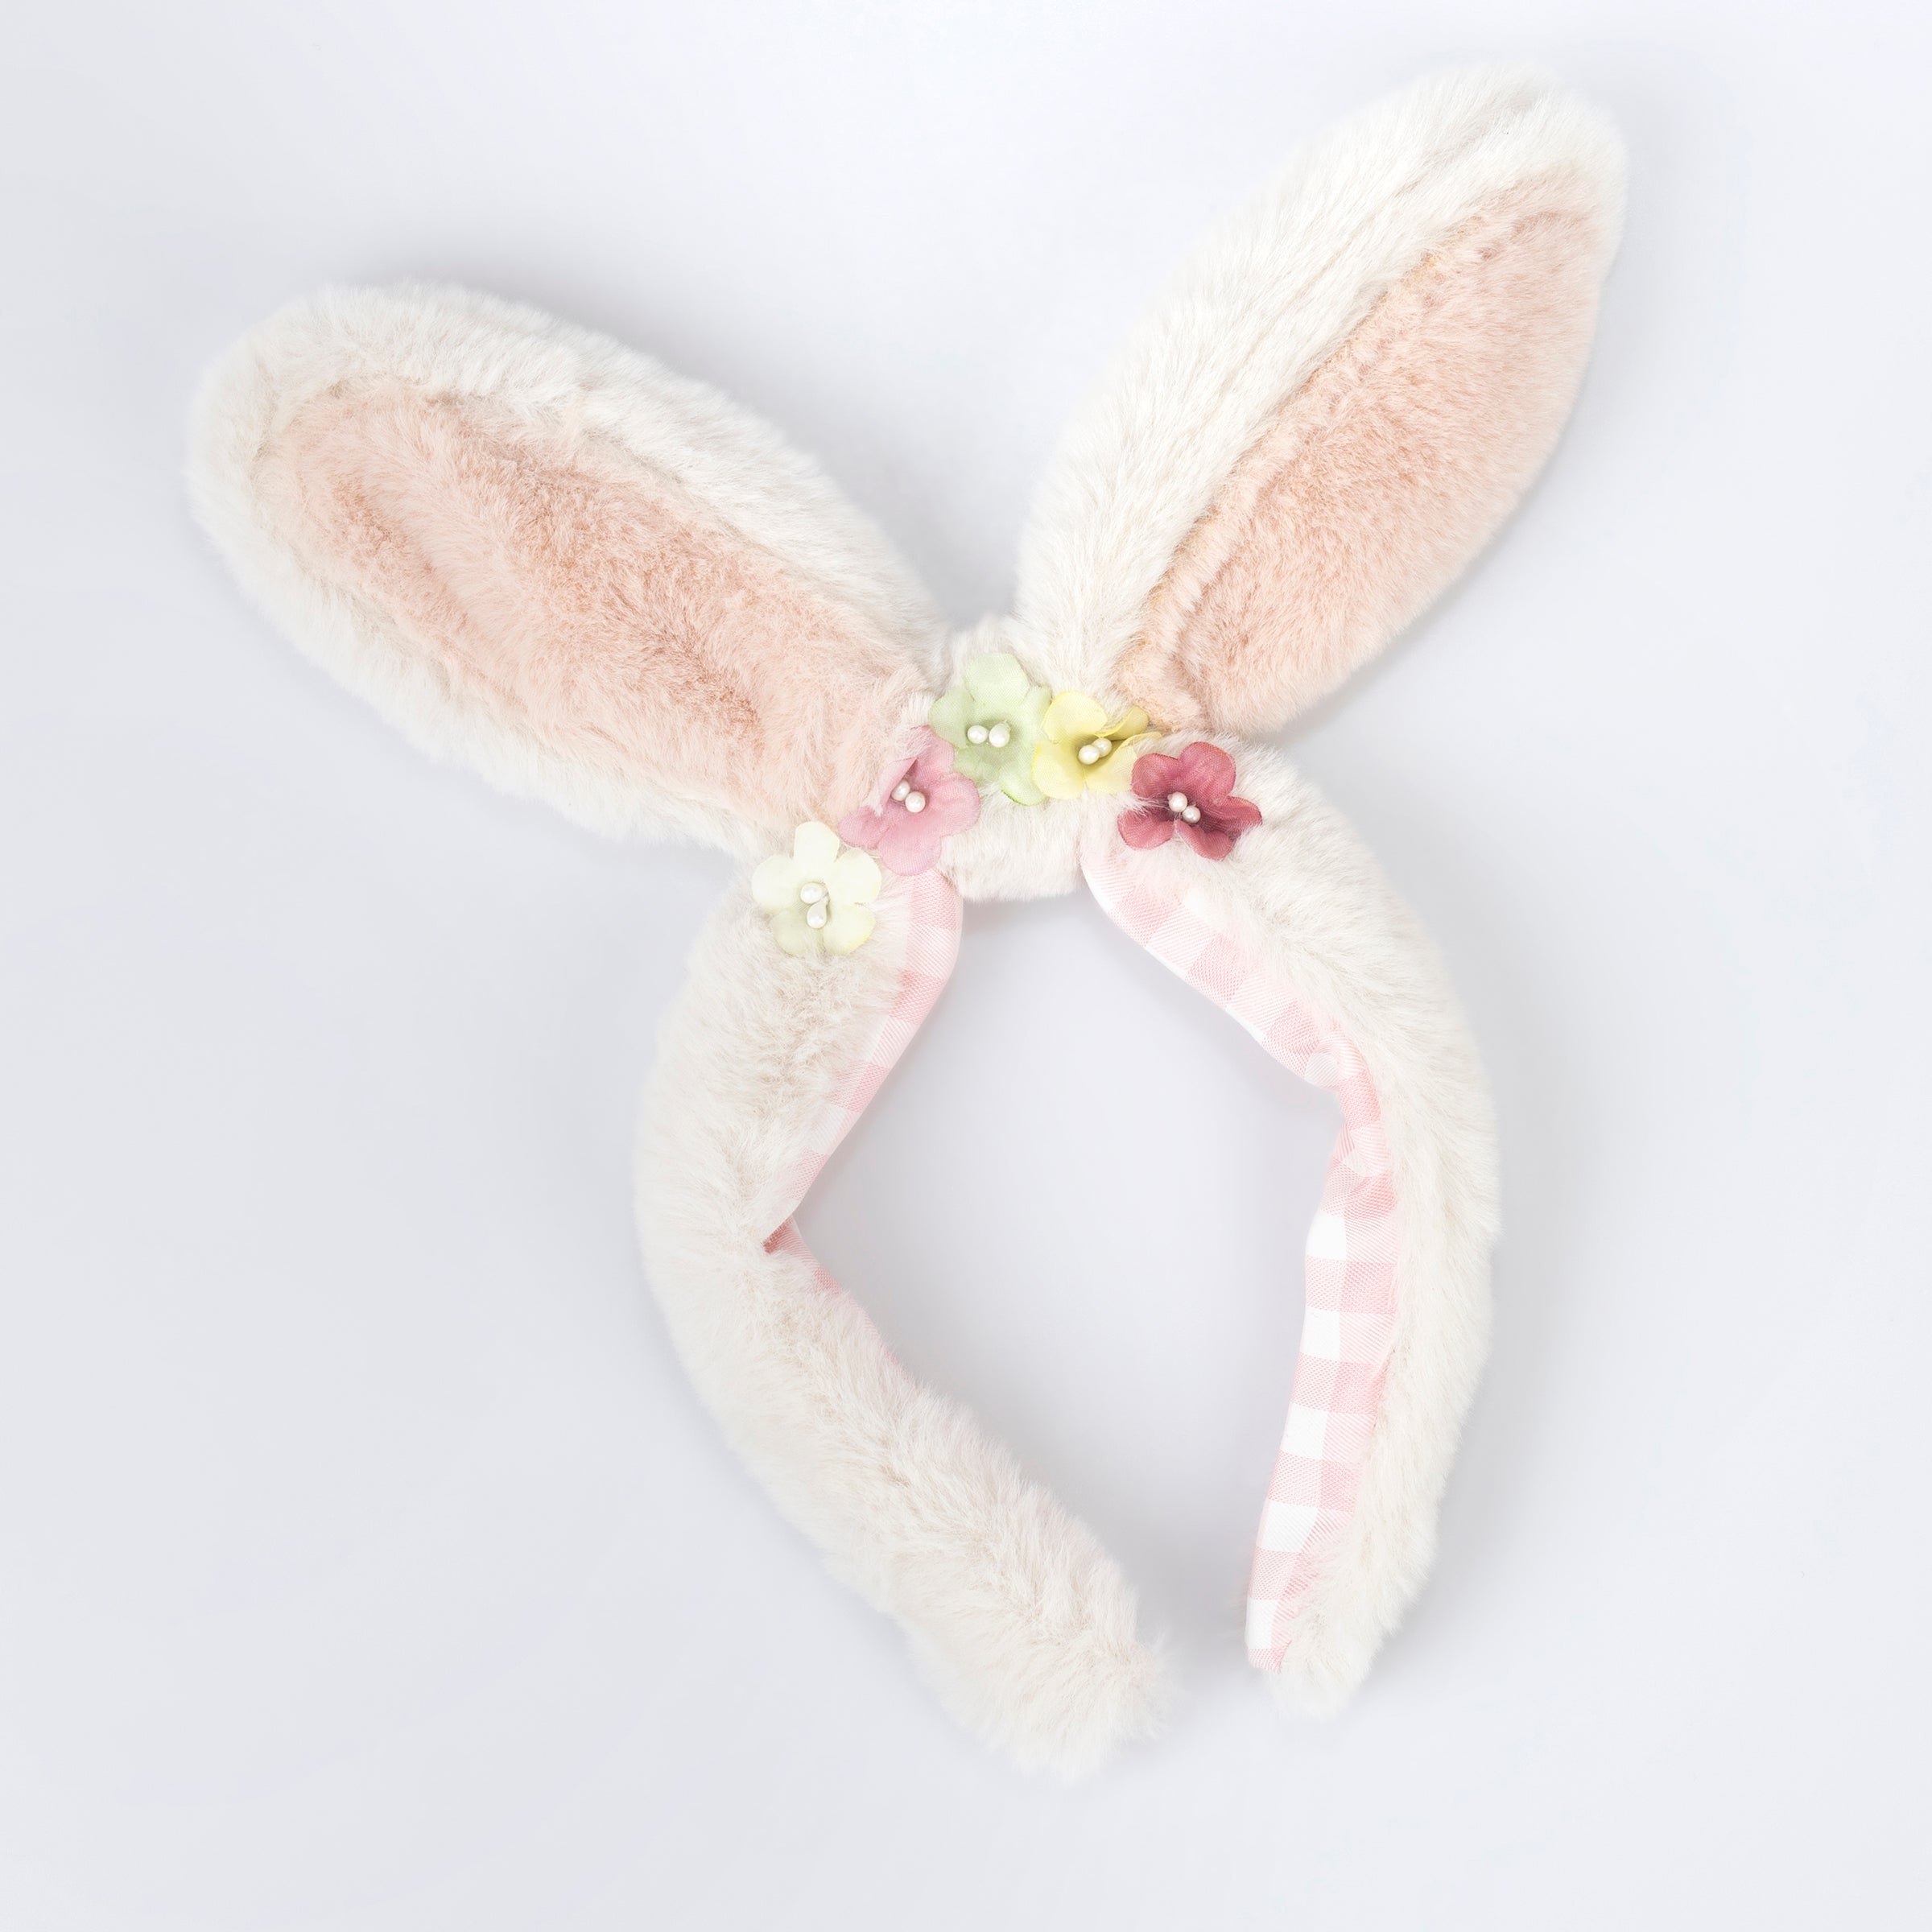 Our Easter costume, a set of bunny ears and tail, is made from plush fabric and presented in a gingham bag.